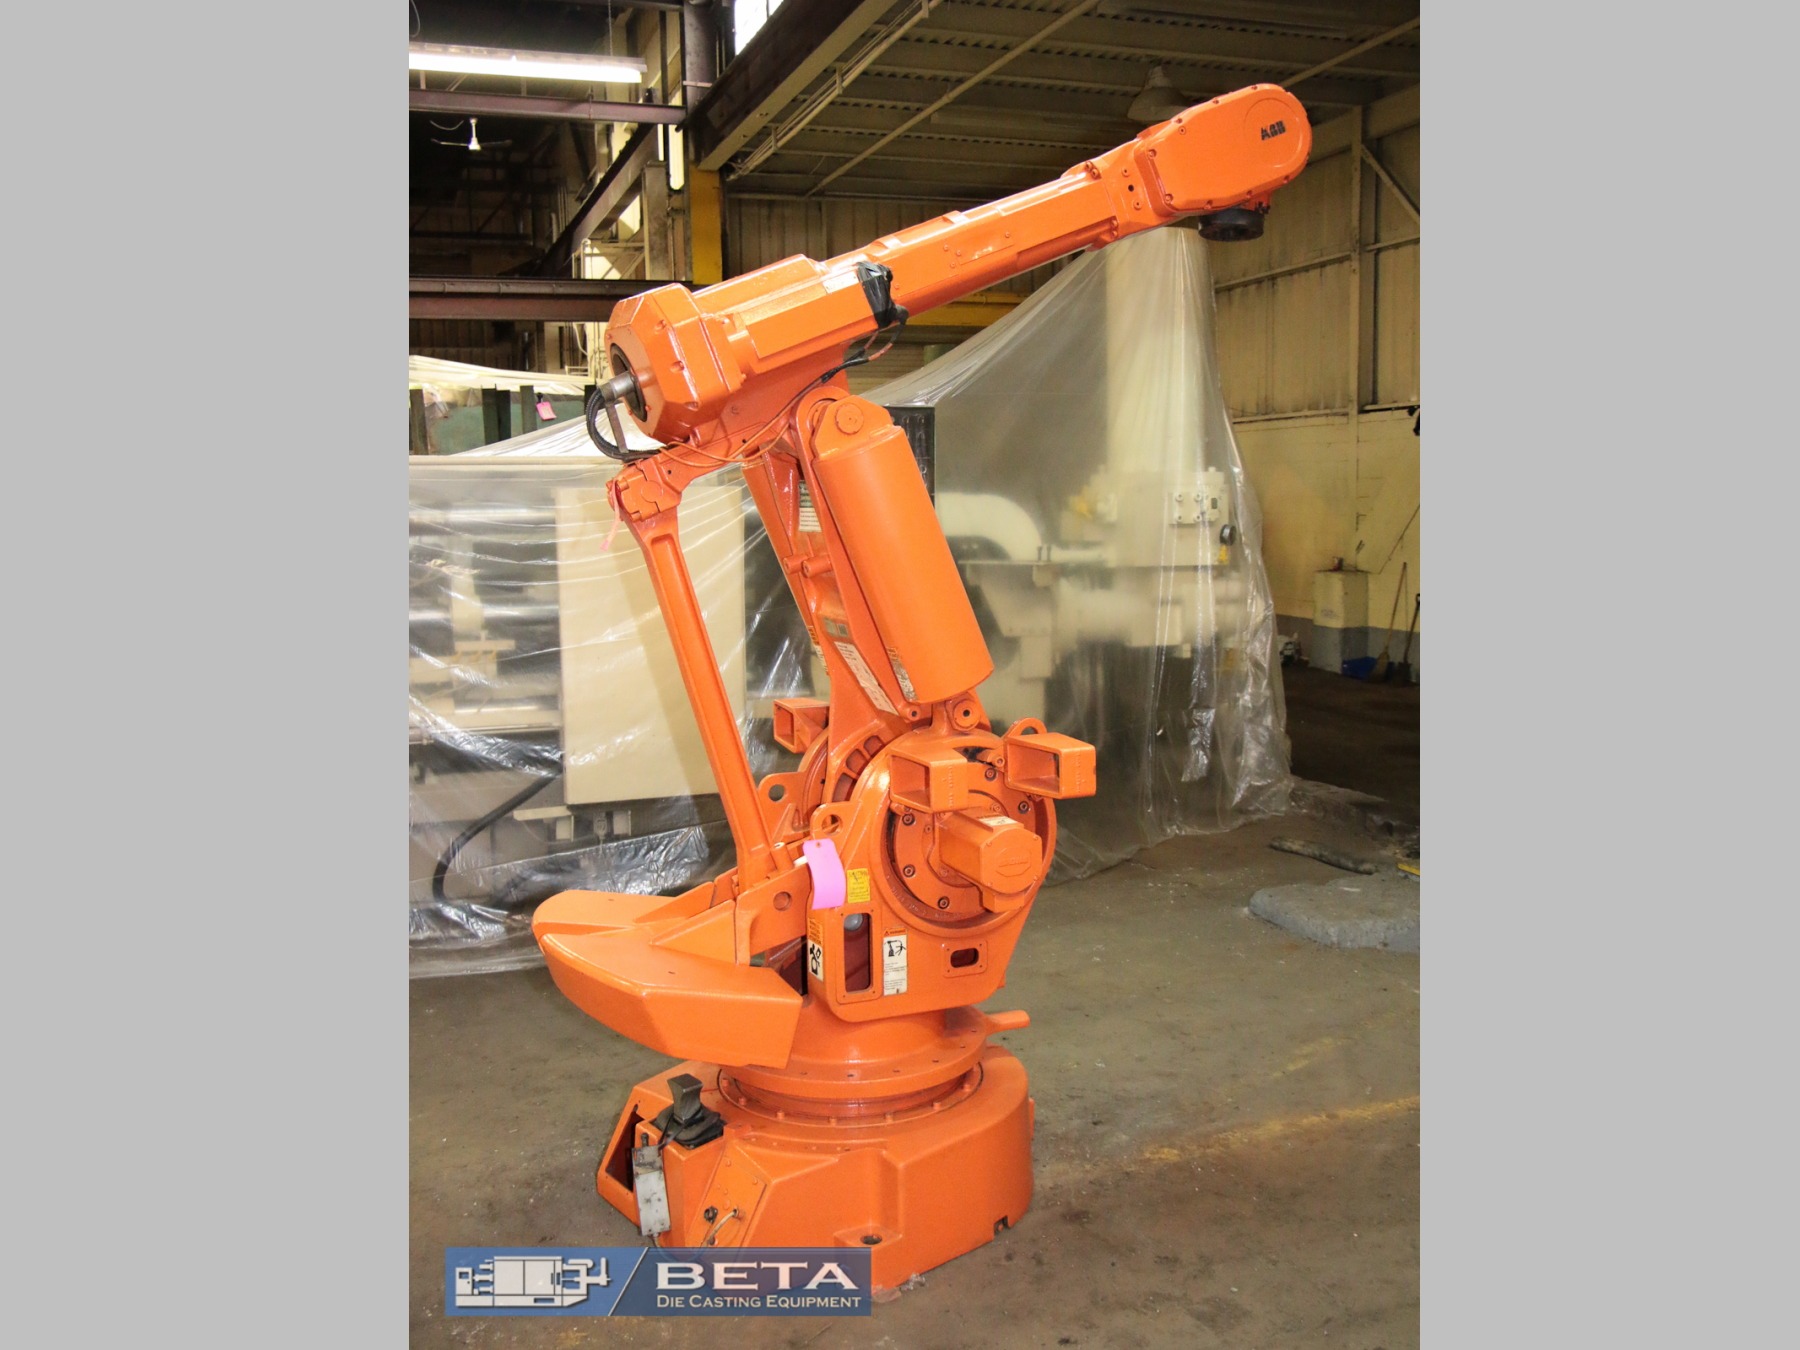 Foundry IDetailed image of Used ABB Foundry Industrial Robotndustrial Robots